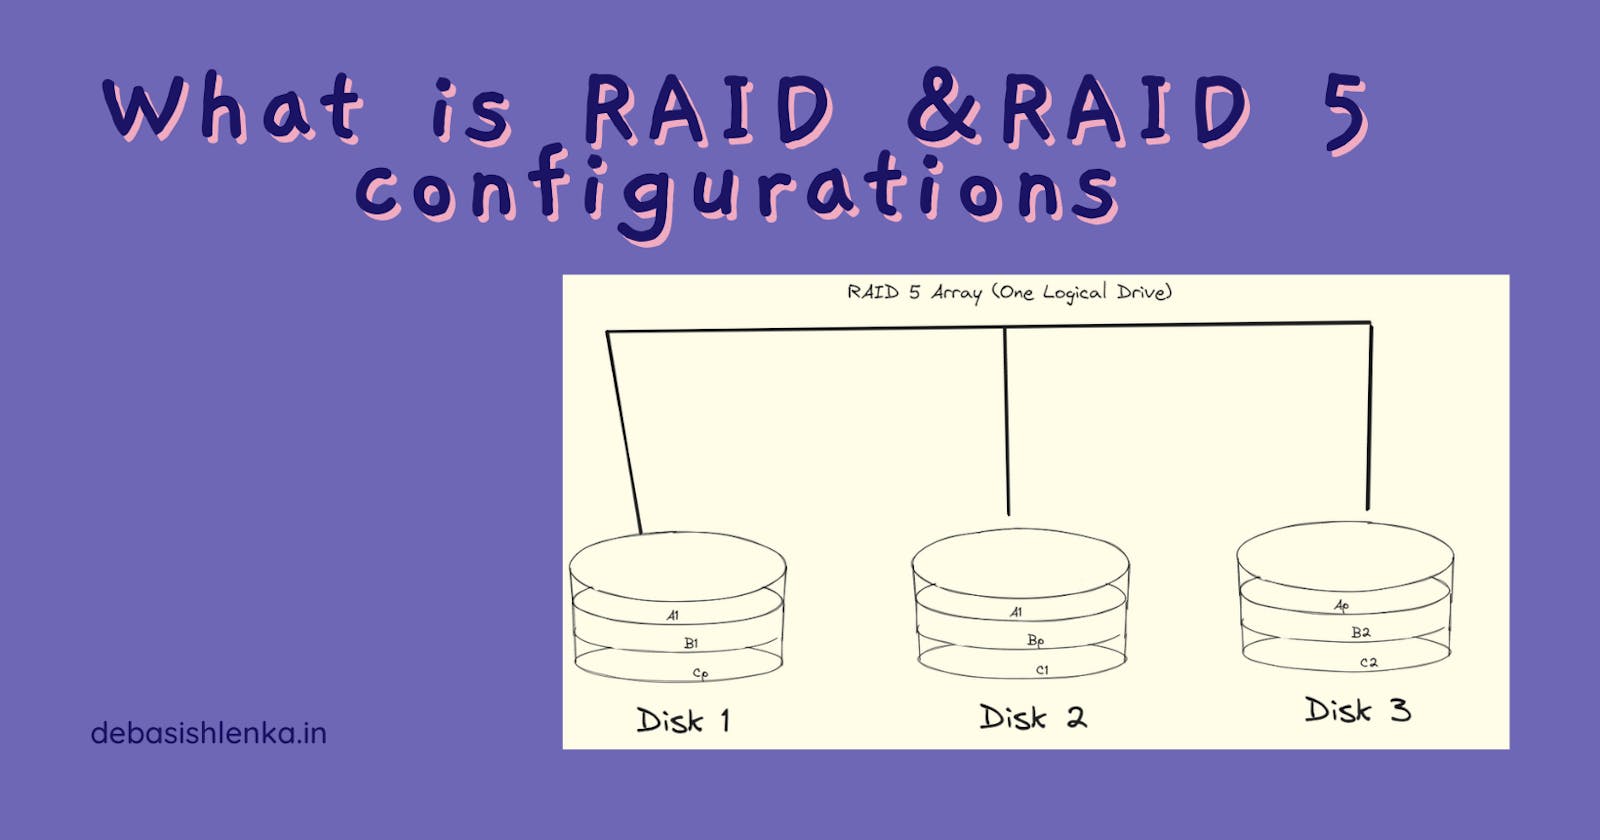 What is RAID and how to configure software RAID 5 in Windows Server?